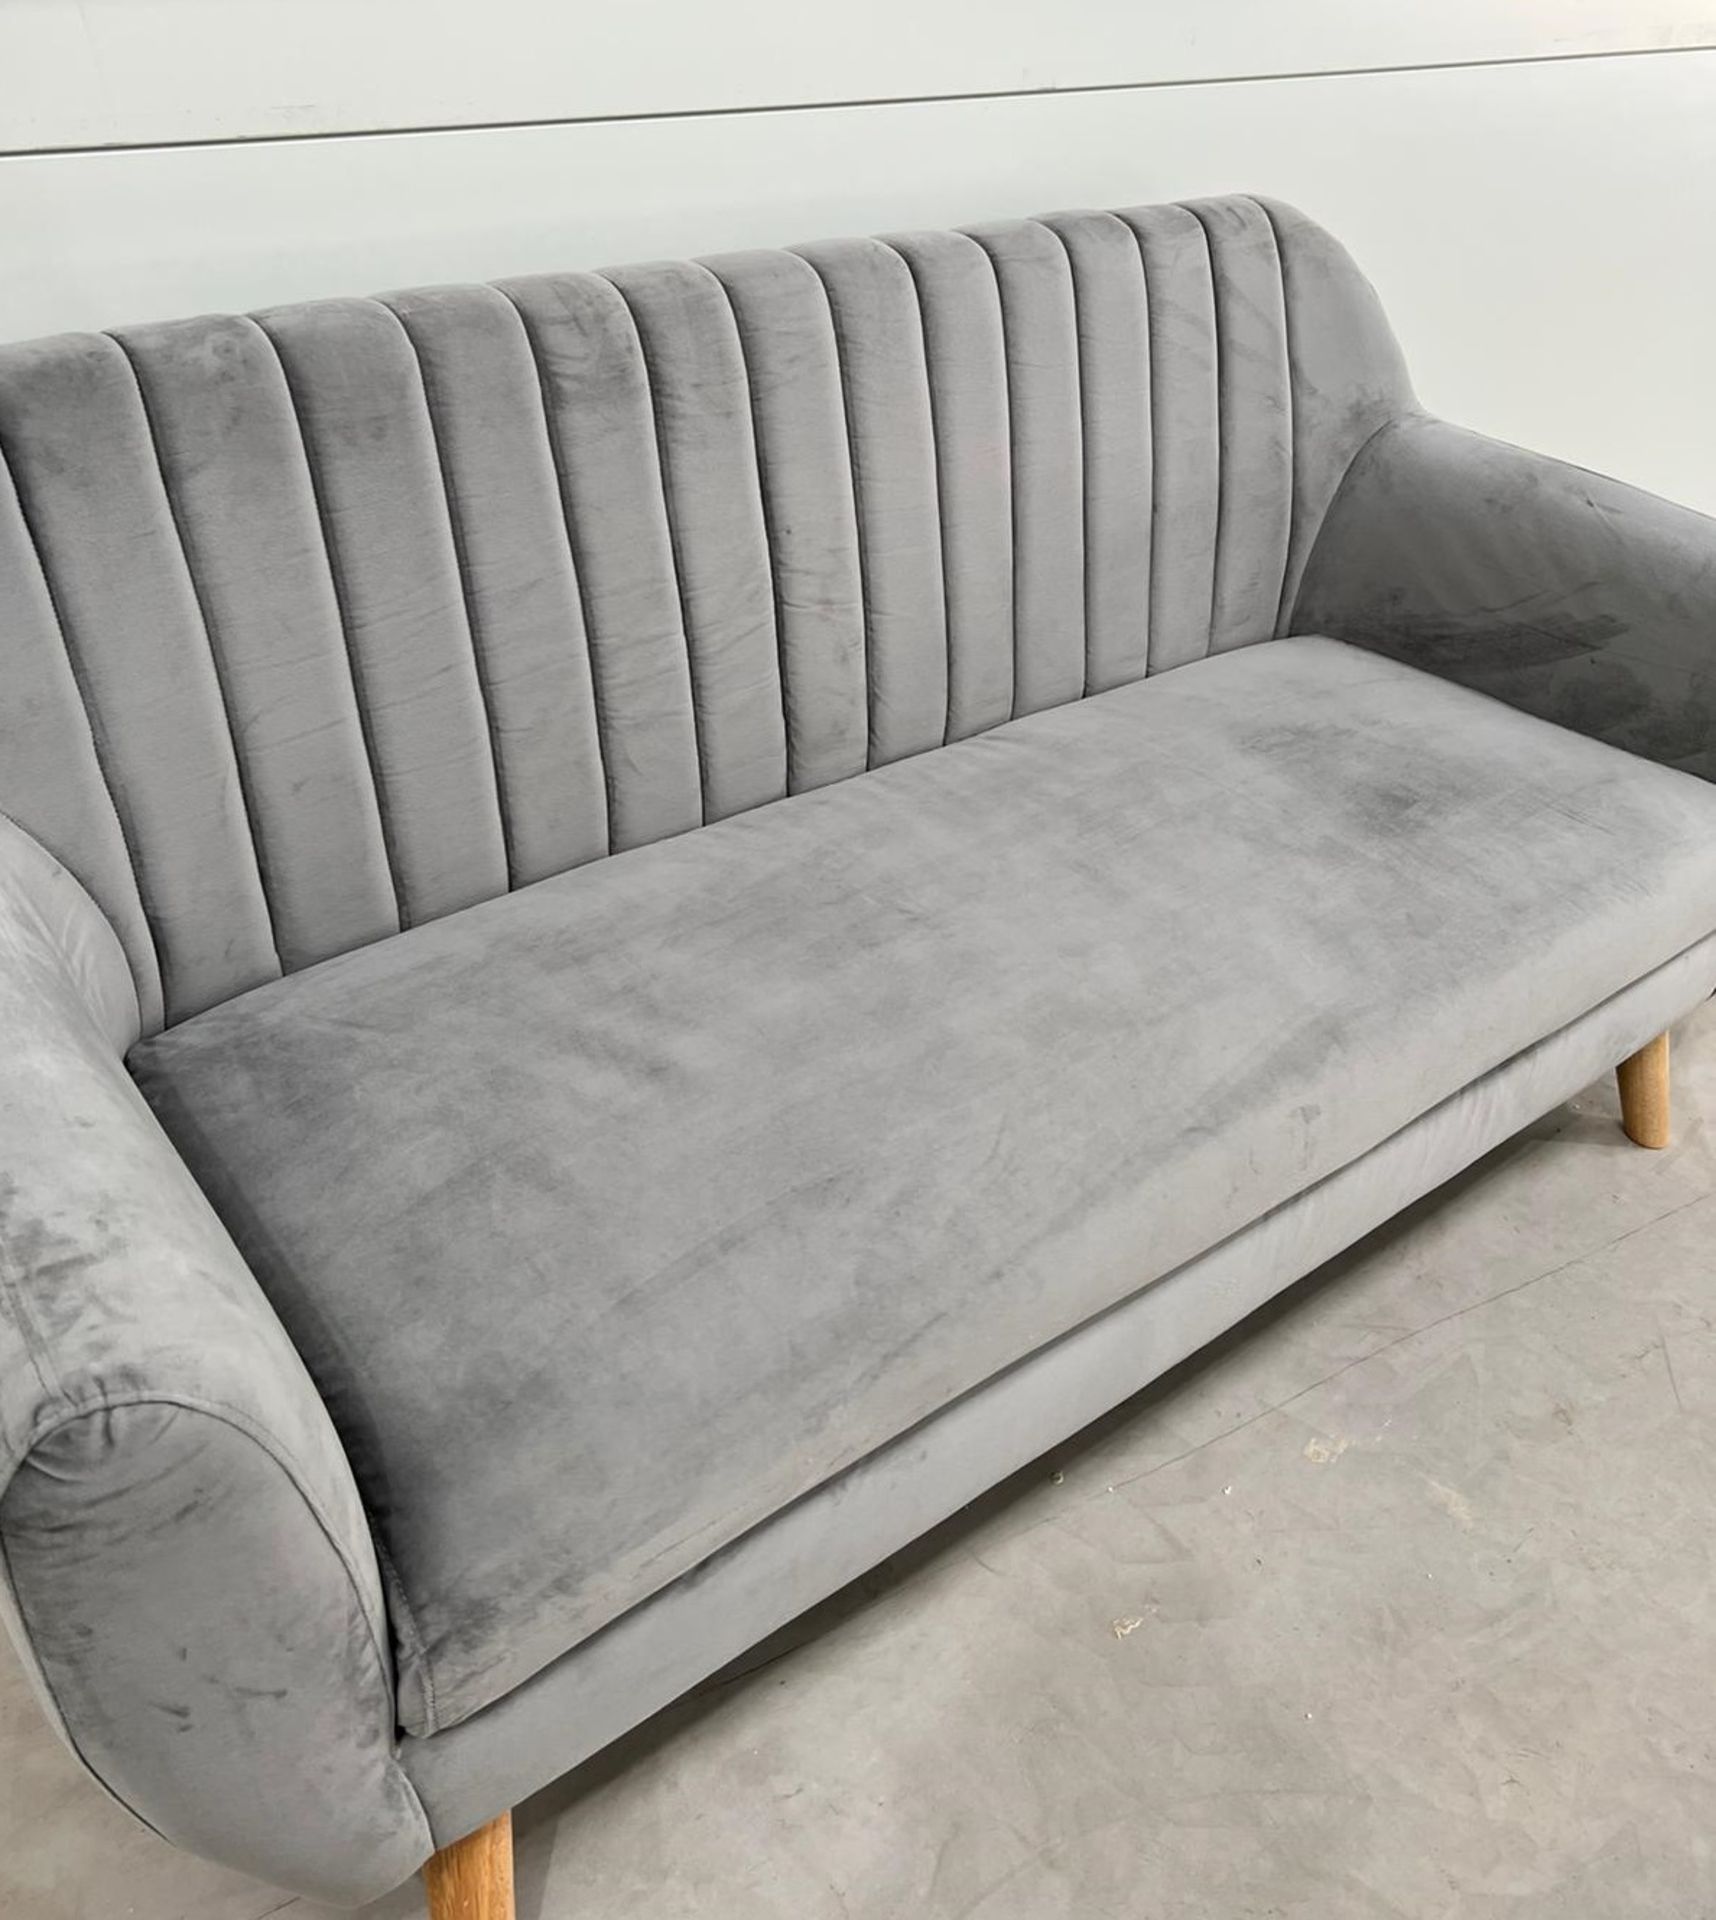 Grey Plush Sofa Make A Striking Impression In Any Home Combination Of Contemporary And Classic - Image 2 of 2